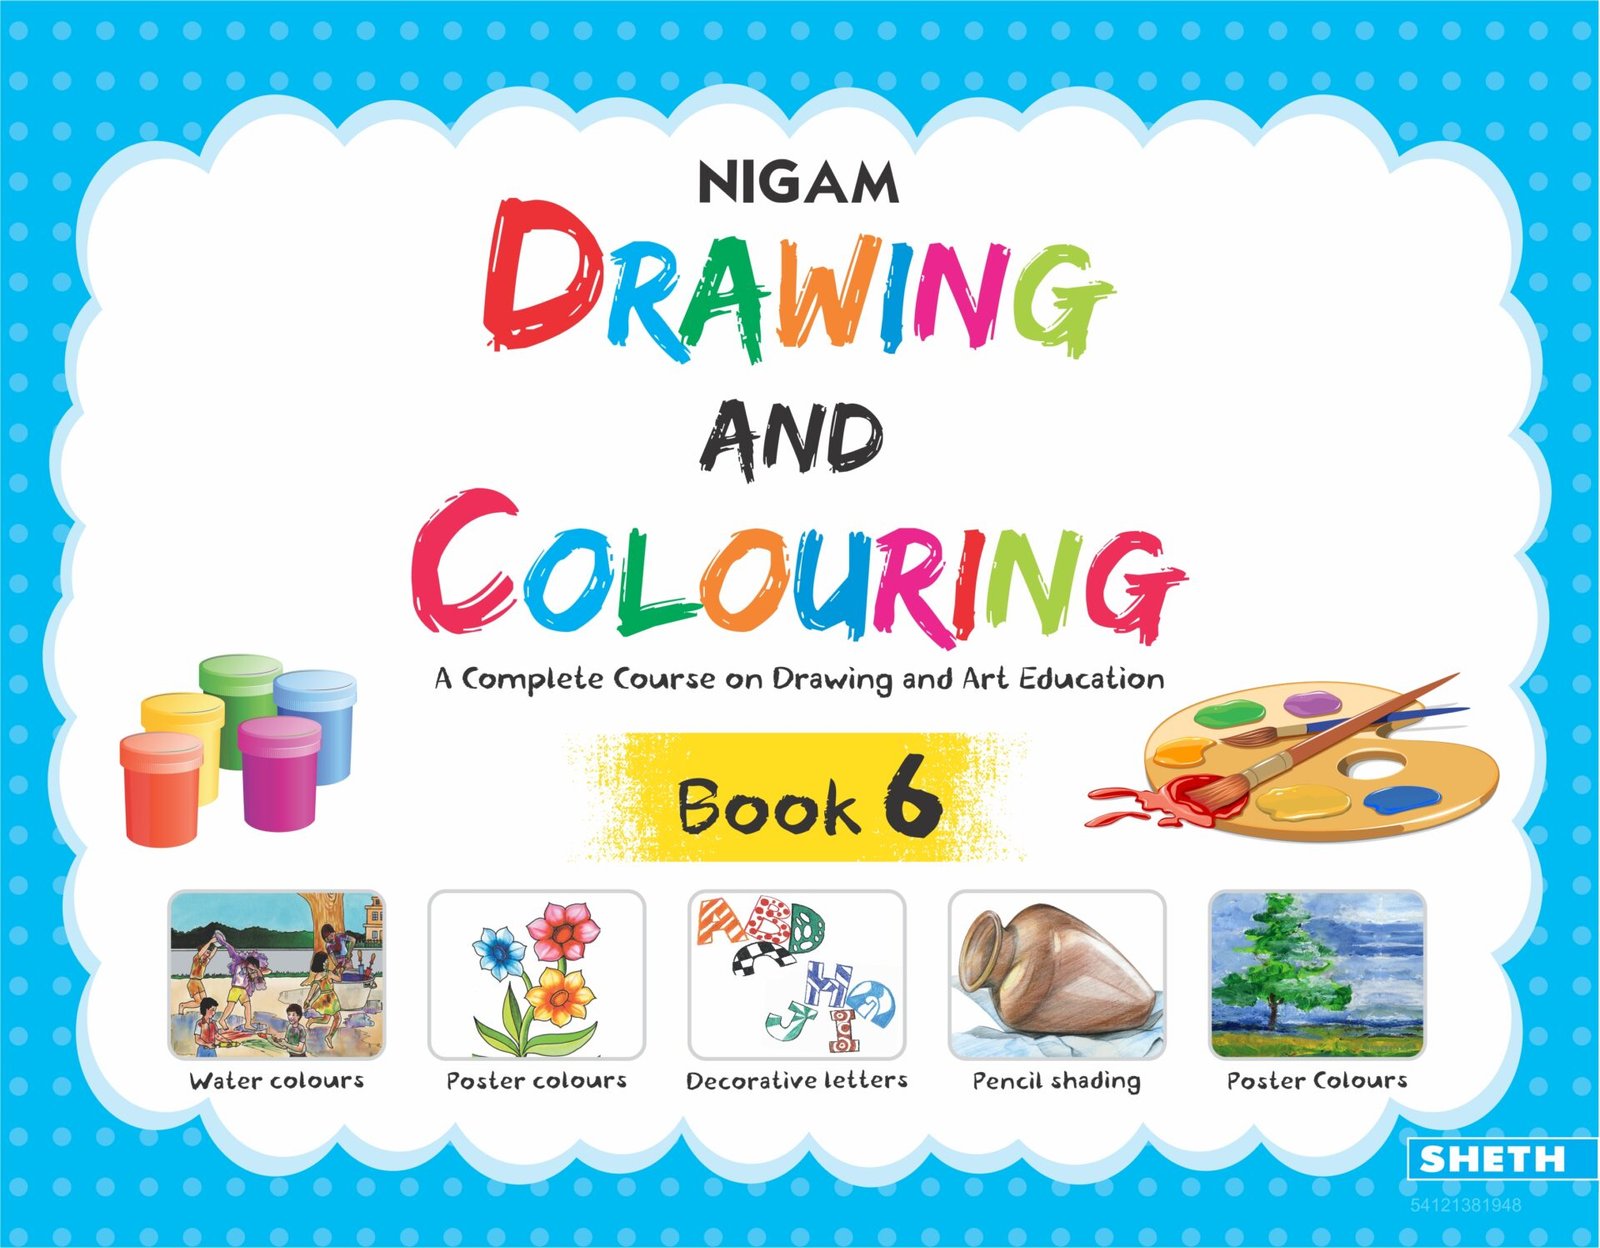 NIgam Drawing and Colouring Book 6 1